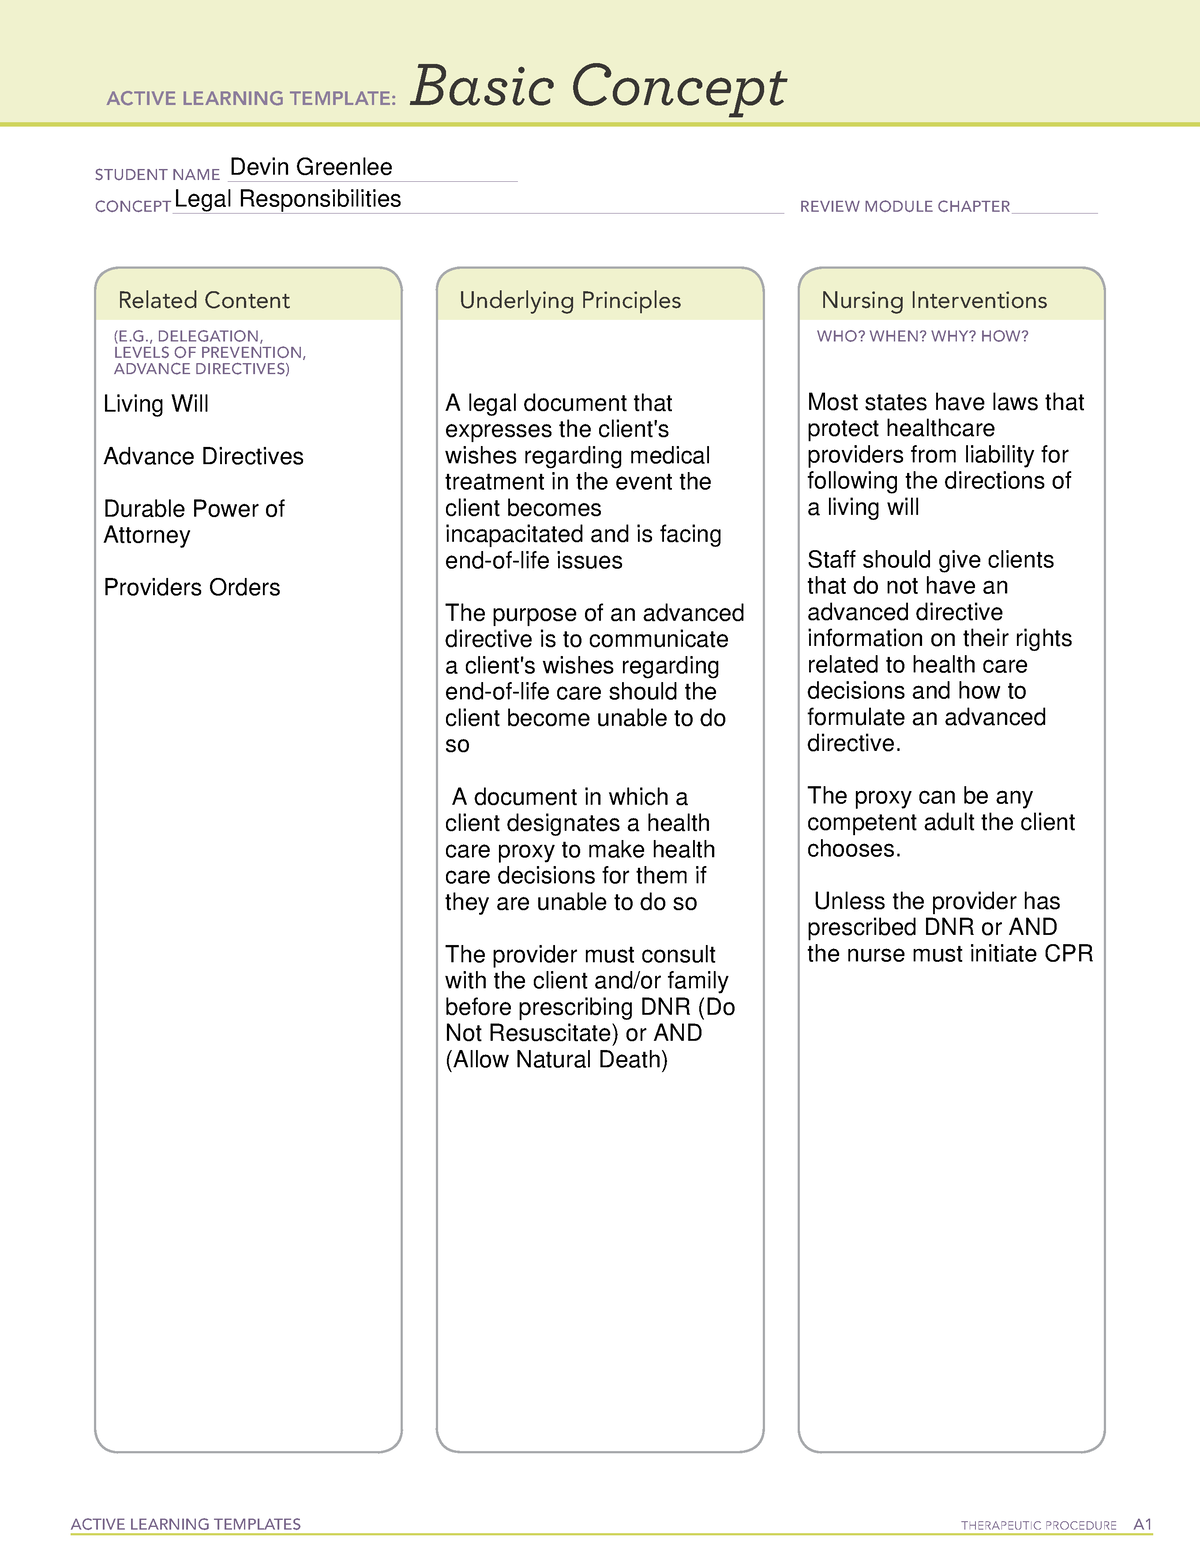 active-learning-template-basic-concept-4-nurs320-active-learning-bank2home